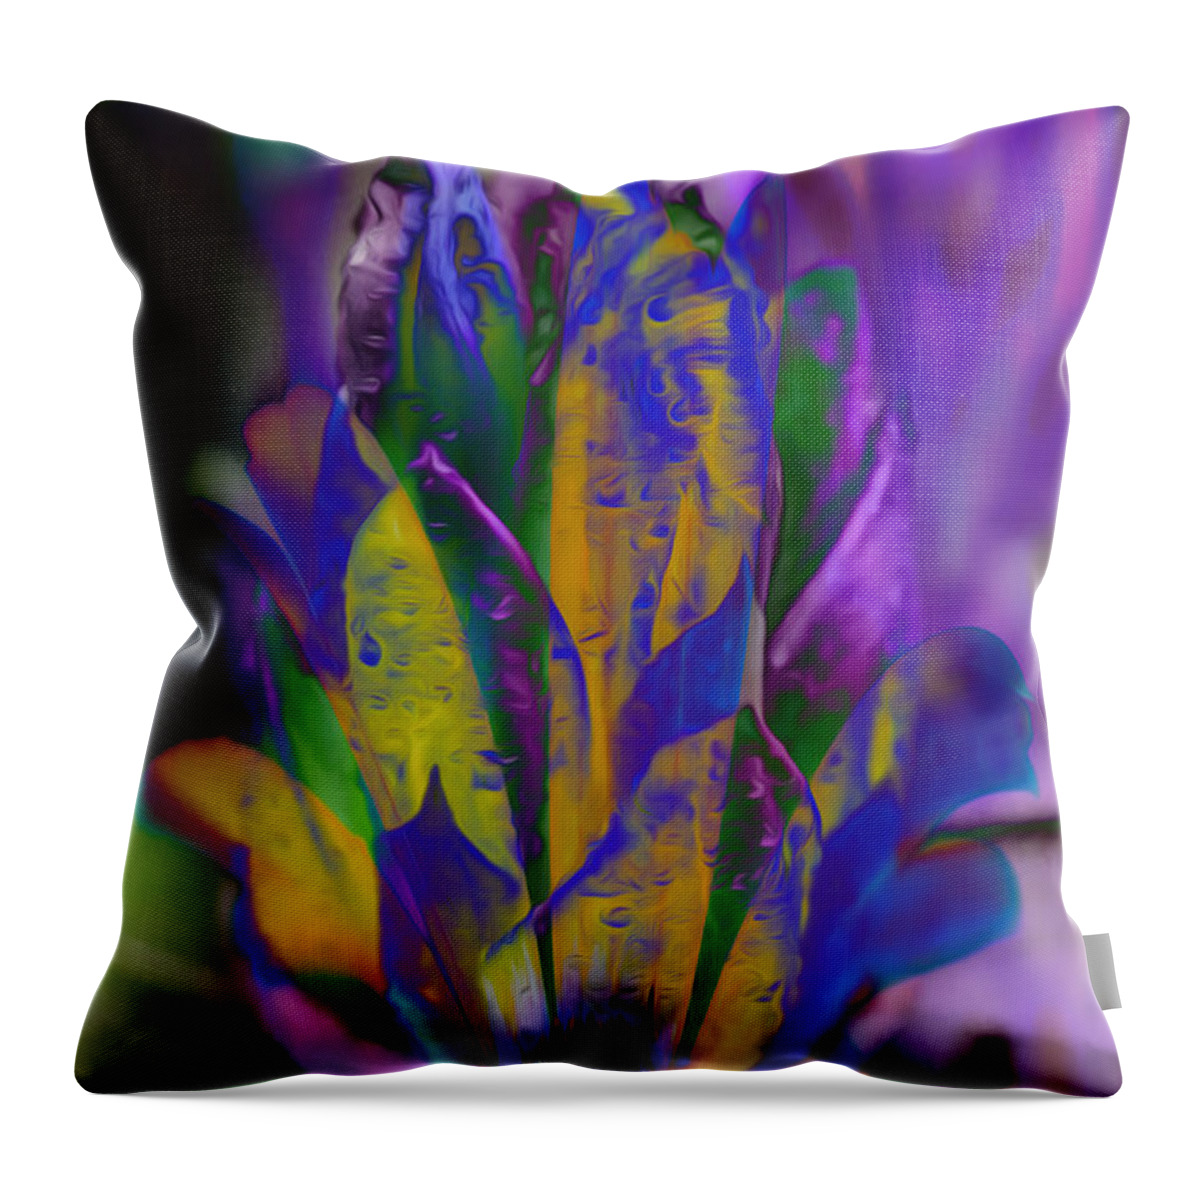 Jessica Manelis Throw Pillow featuring the photograph Abstract #4 by Jessica Manelis